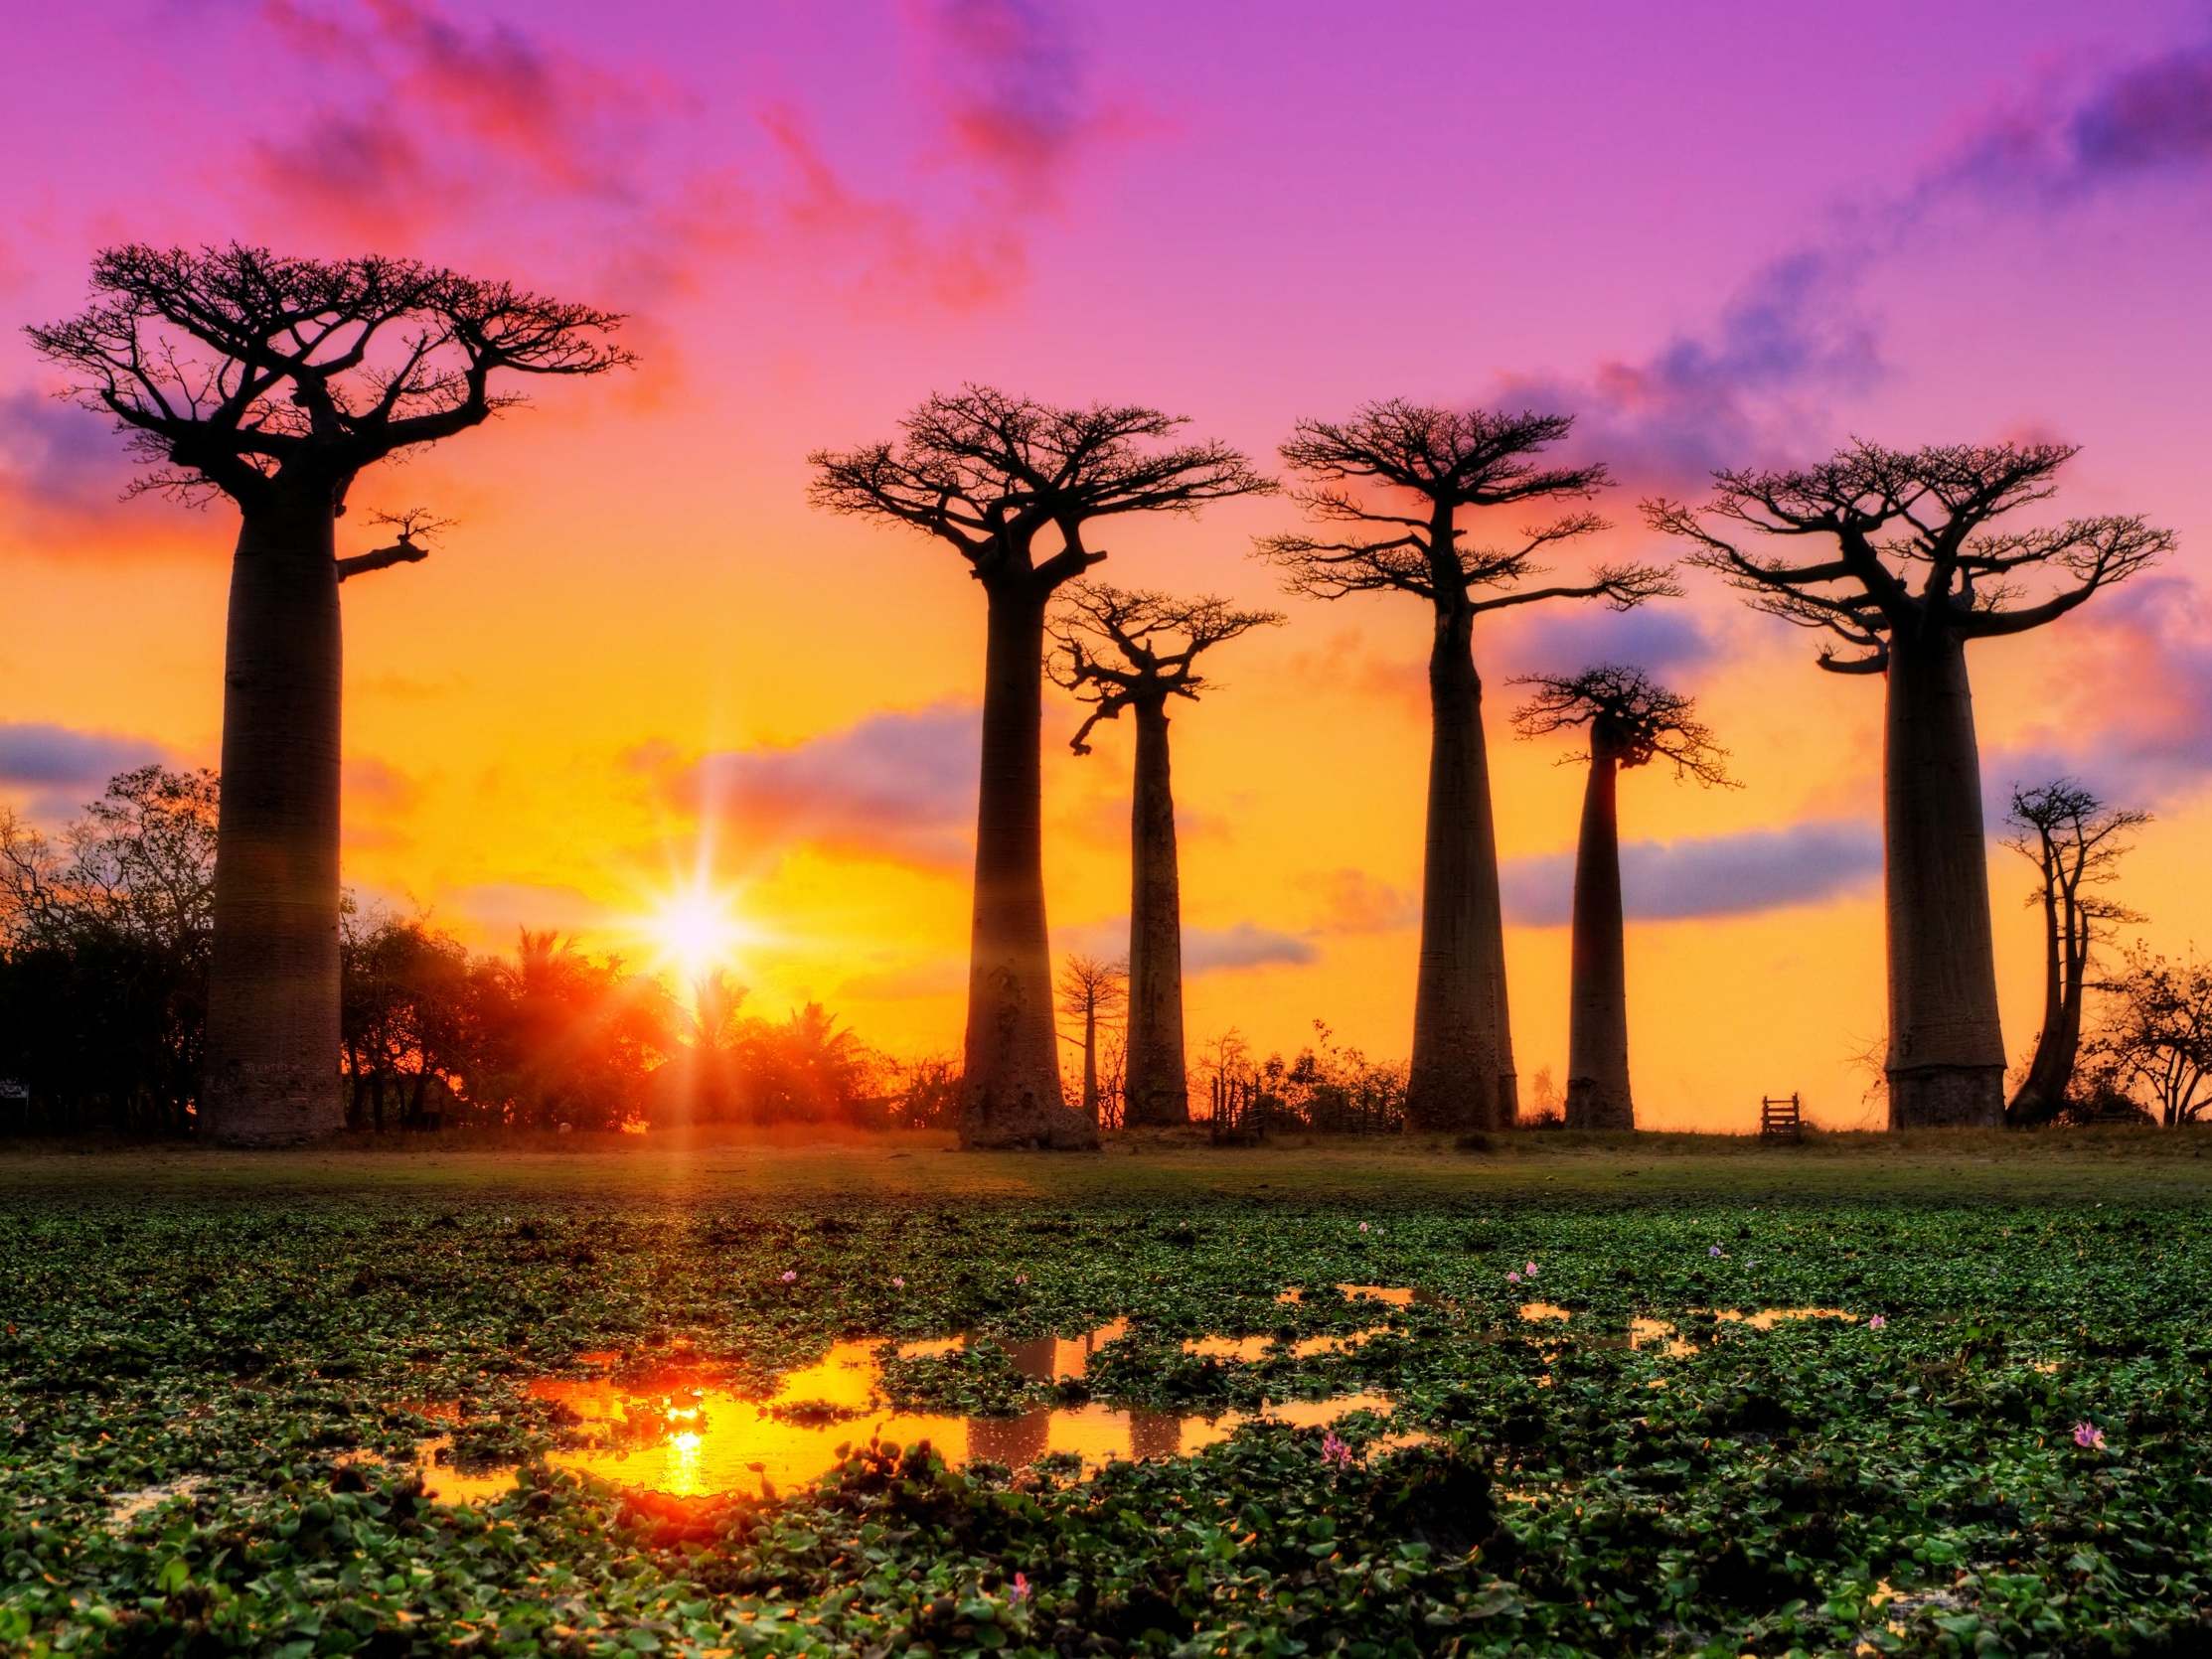 Sunset at the Avenue of the Baobabs in Madagascar – or Mogadishu, according to Marco Polo